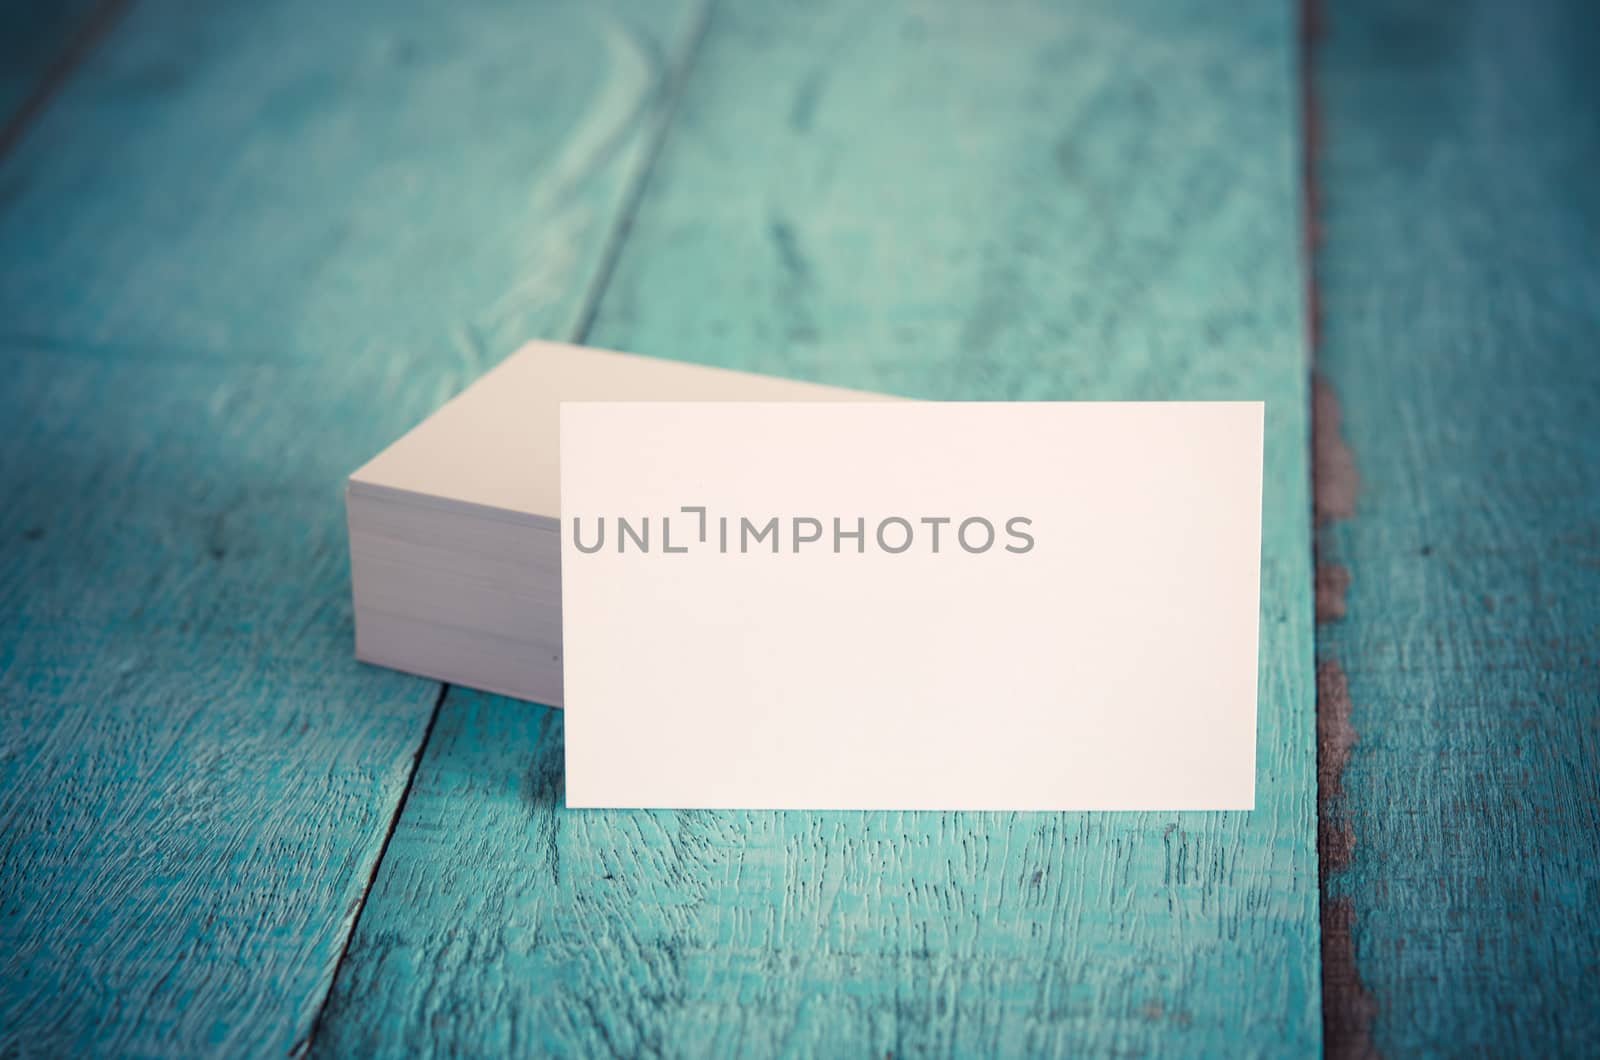 Blank business cards on blue wooden table. Vintage filter.